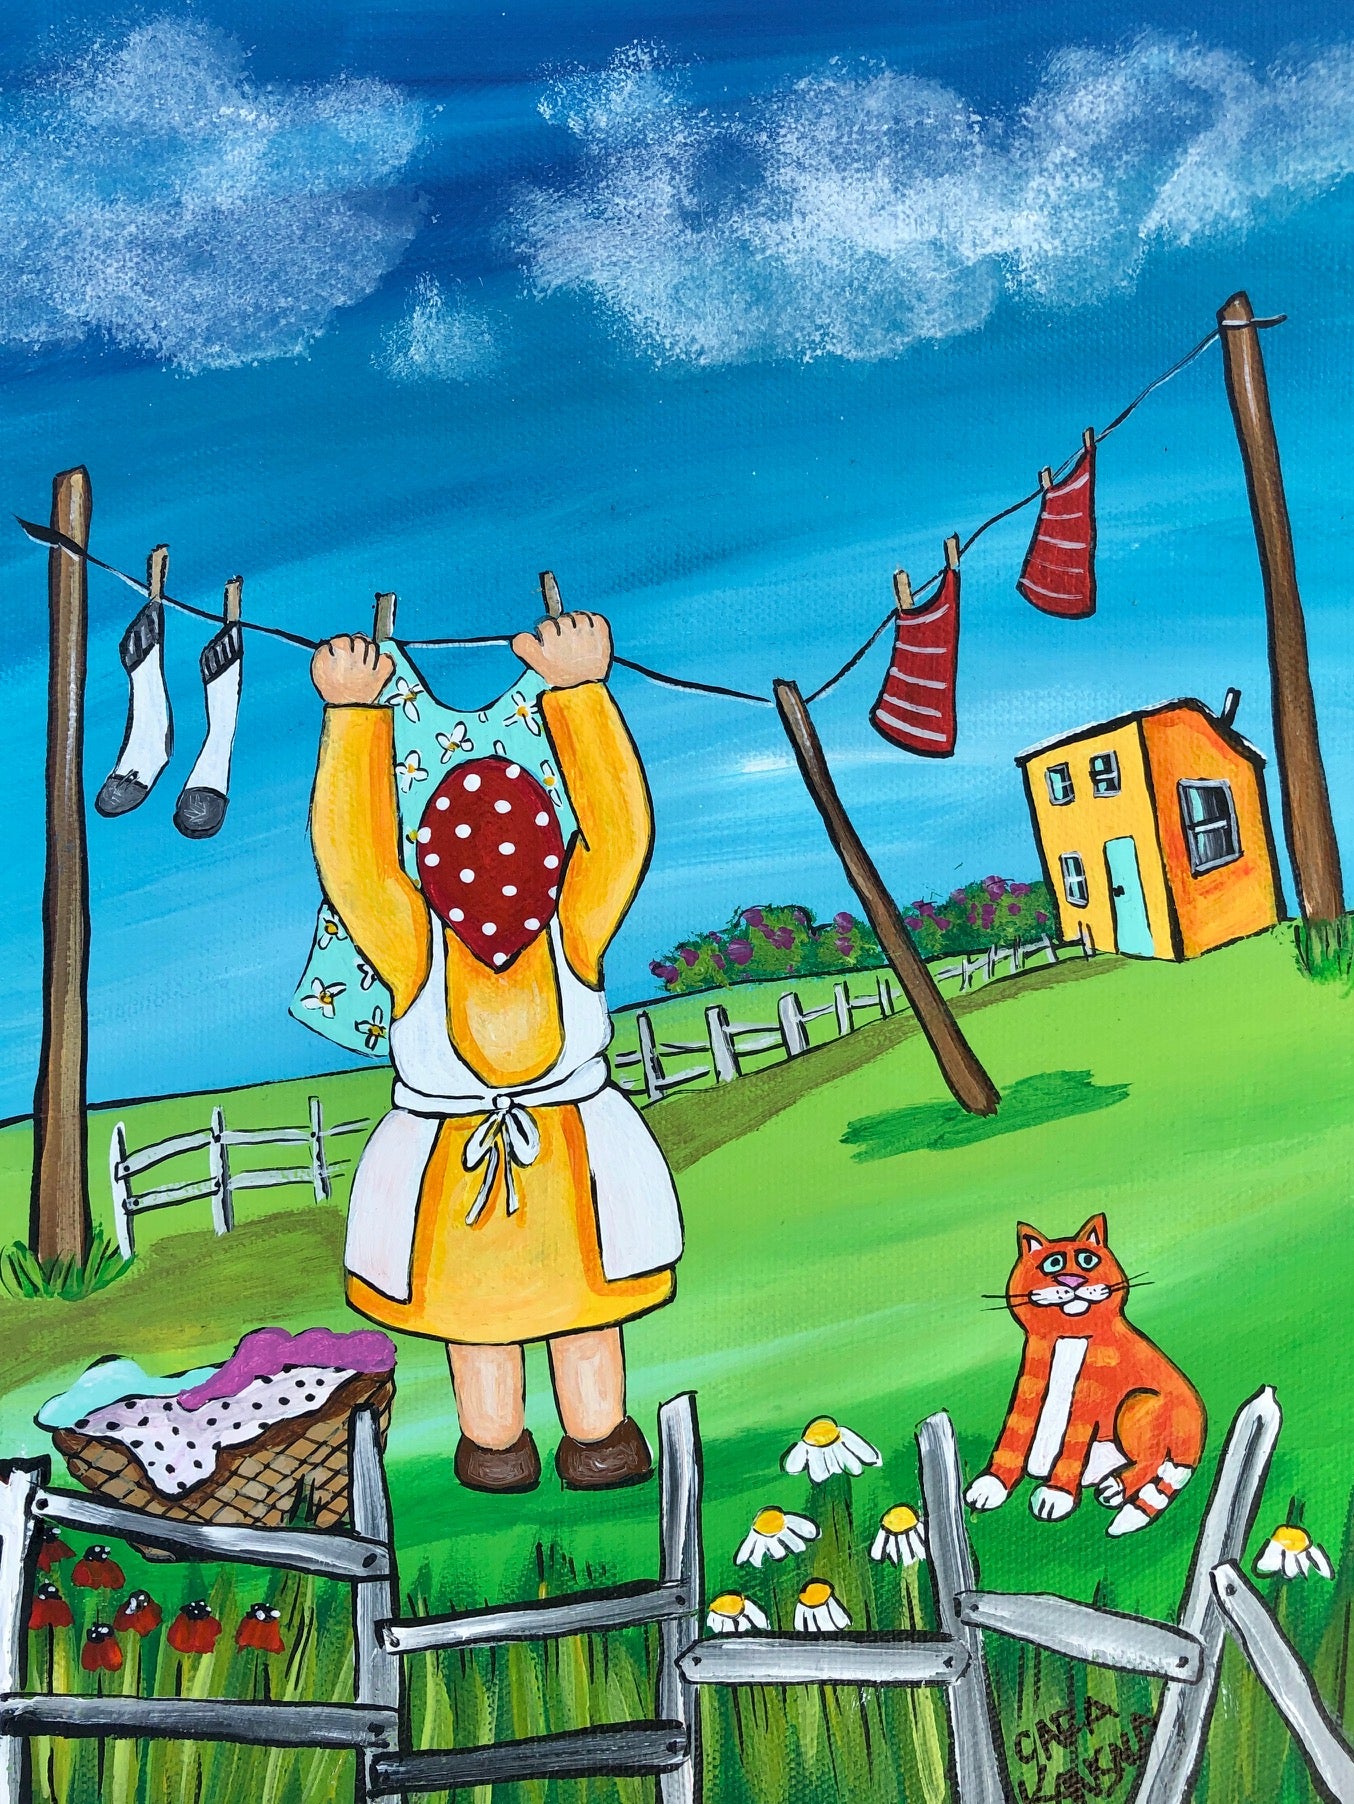 (SOLD) It was a fine day for laundry, so Nan hung the line and the Marmalade Cat came for a visit and they made sure to keep at least two arm lengths apart.